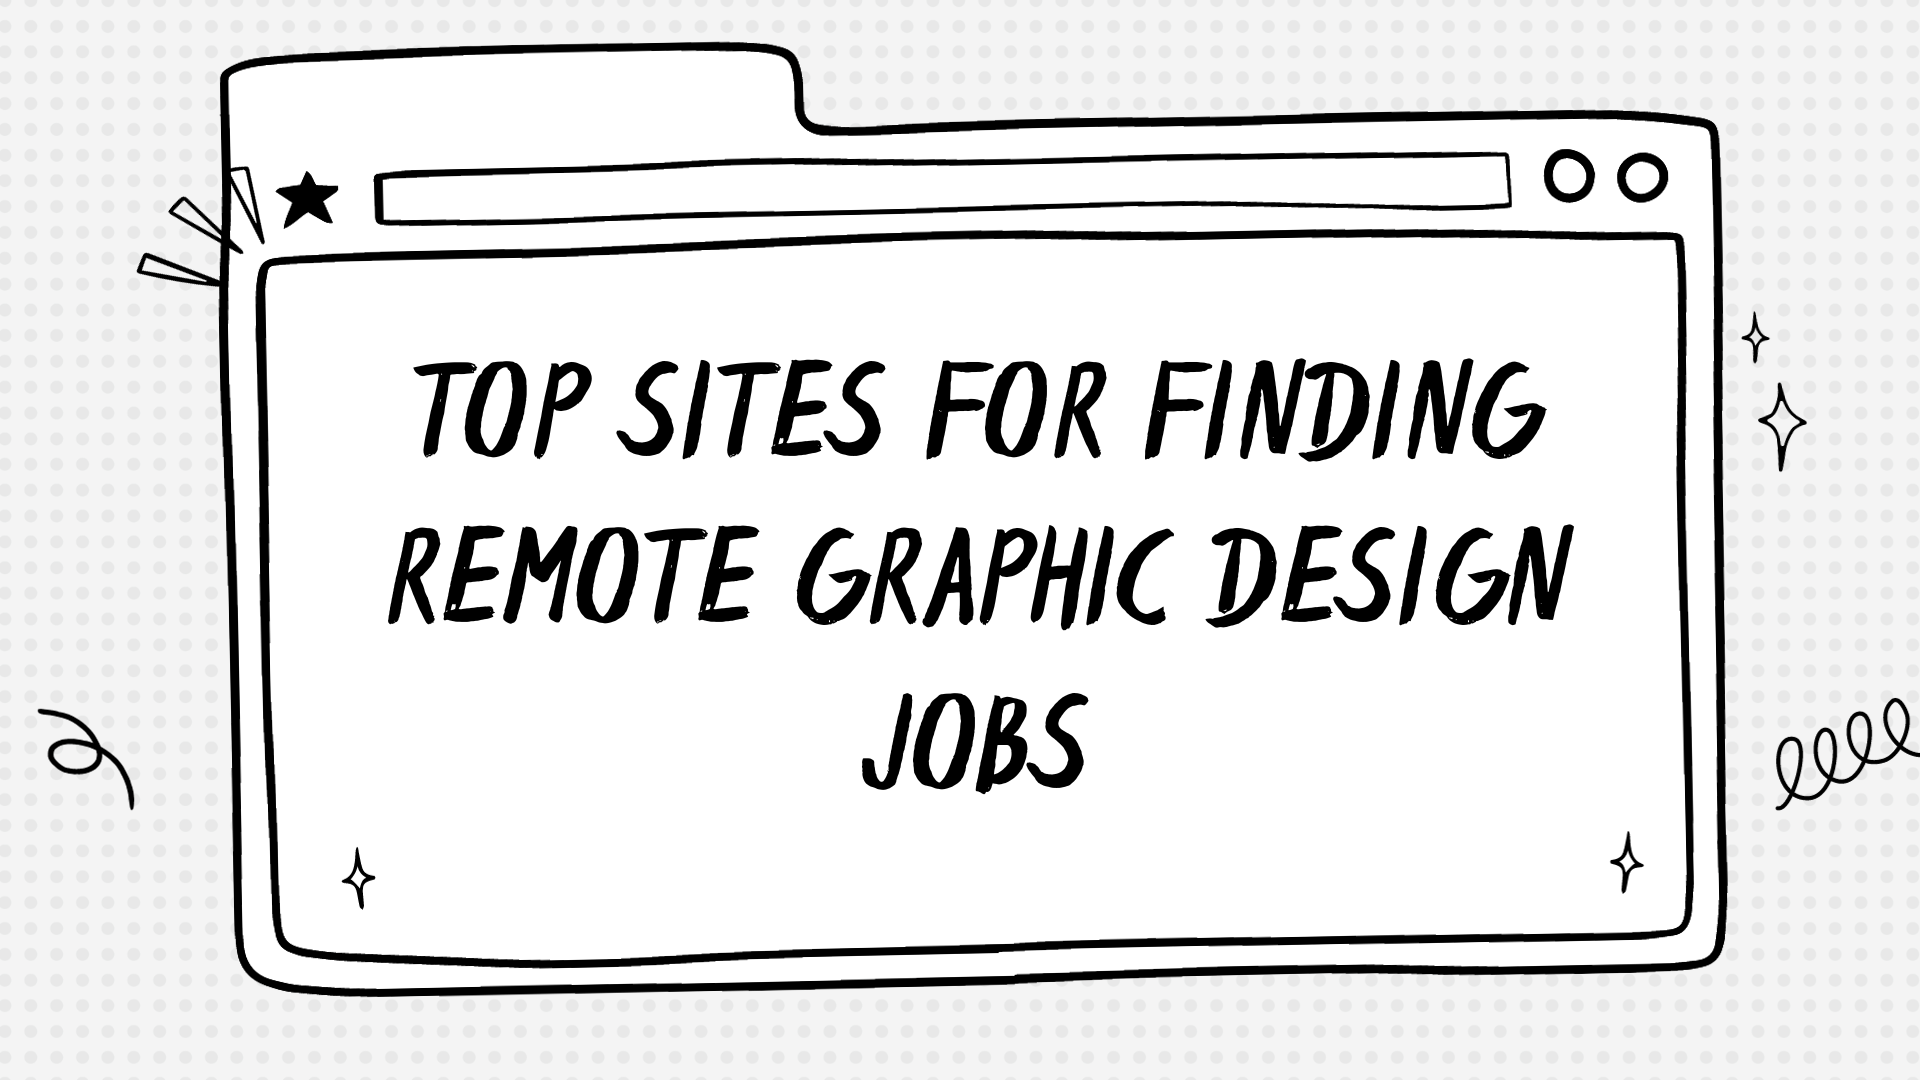 Top Sites For Finding Remote Graphic Design Jobs